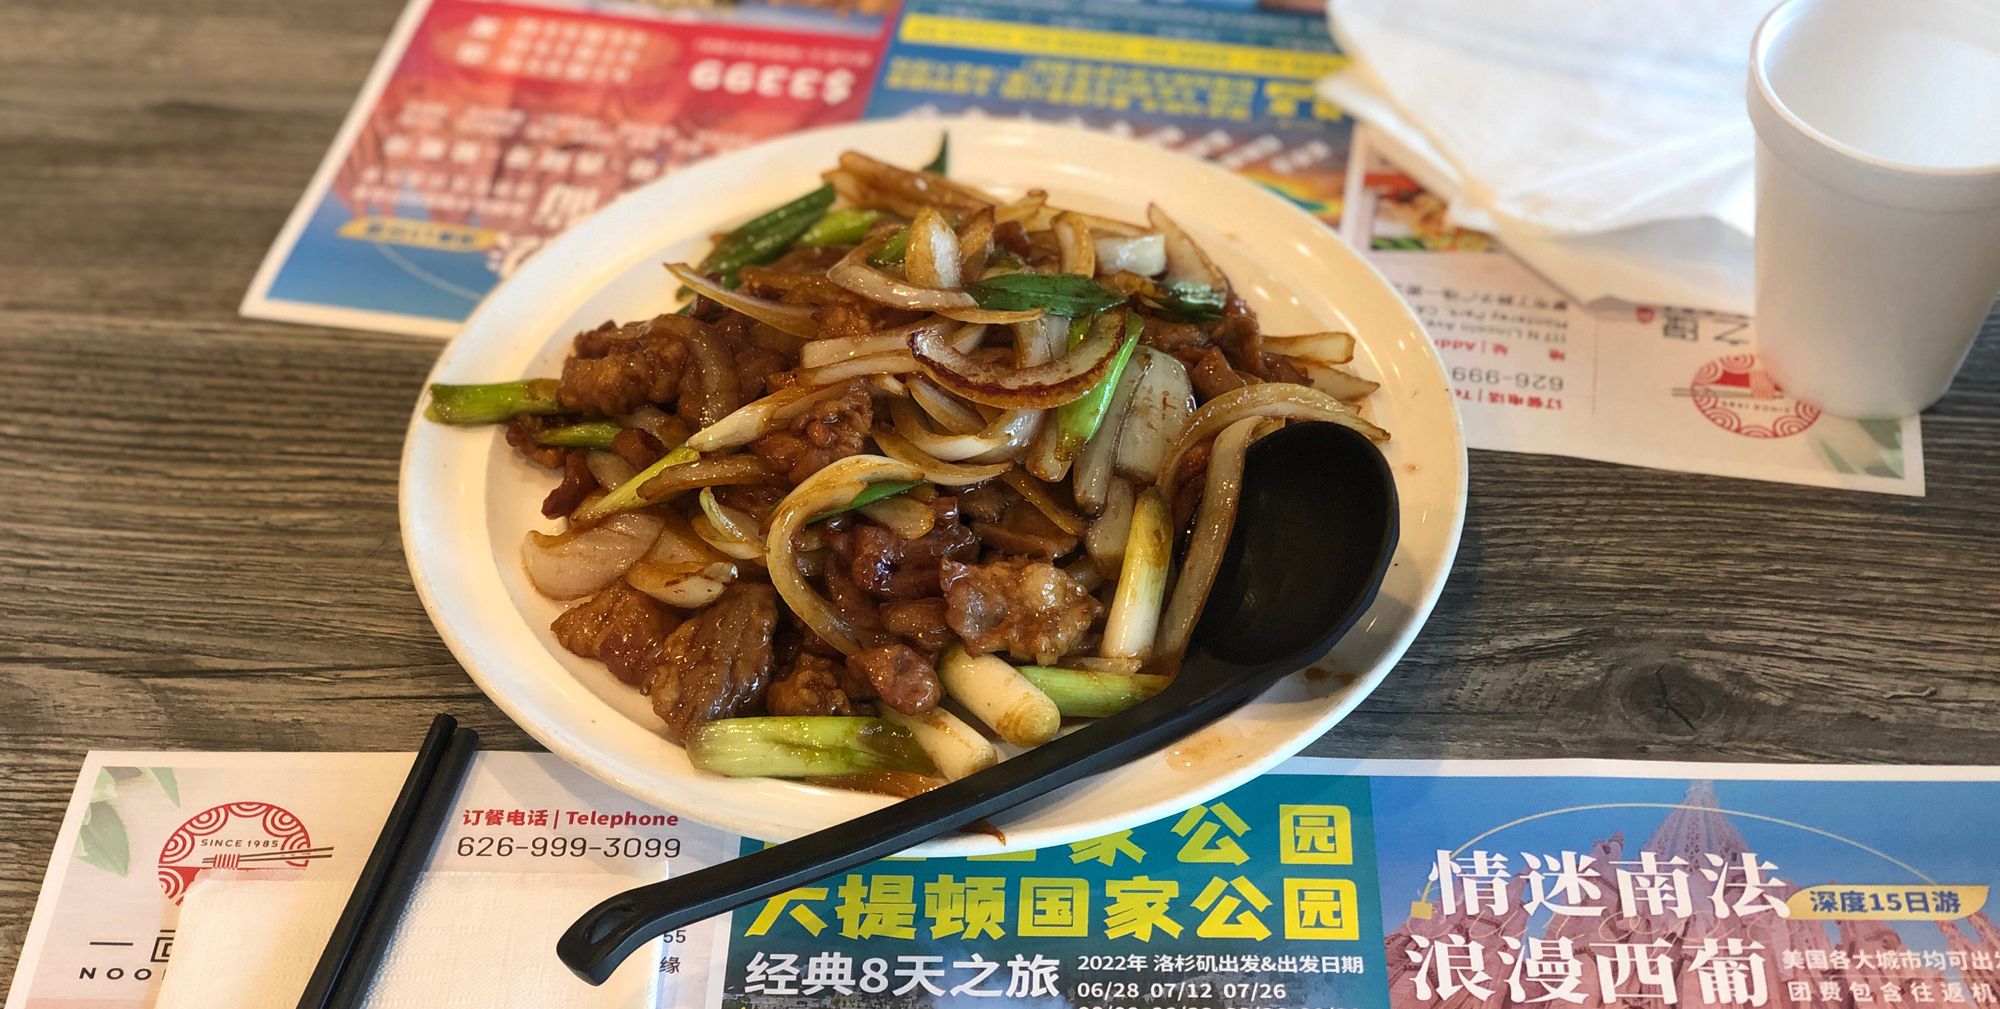 Review: meat and noodles on the Silk Road